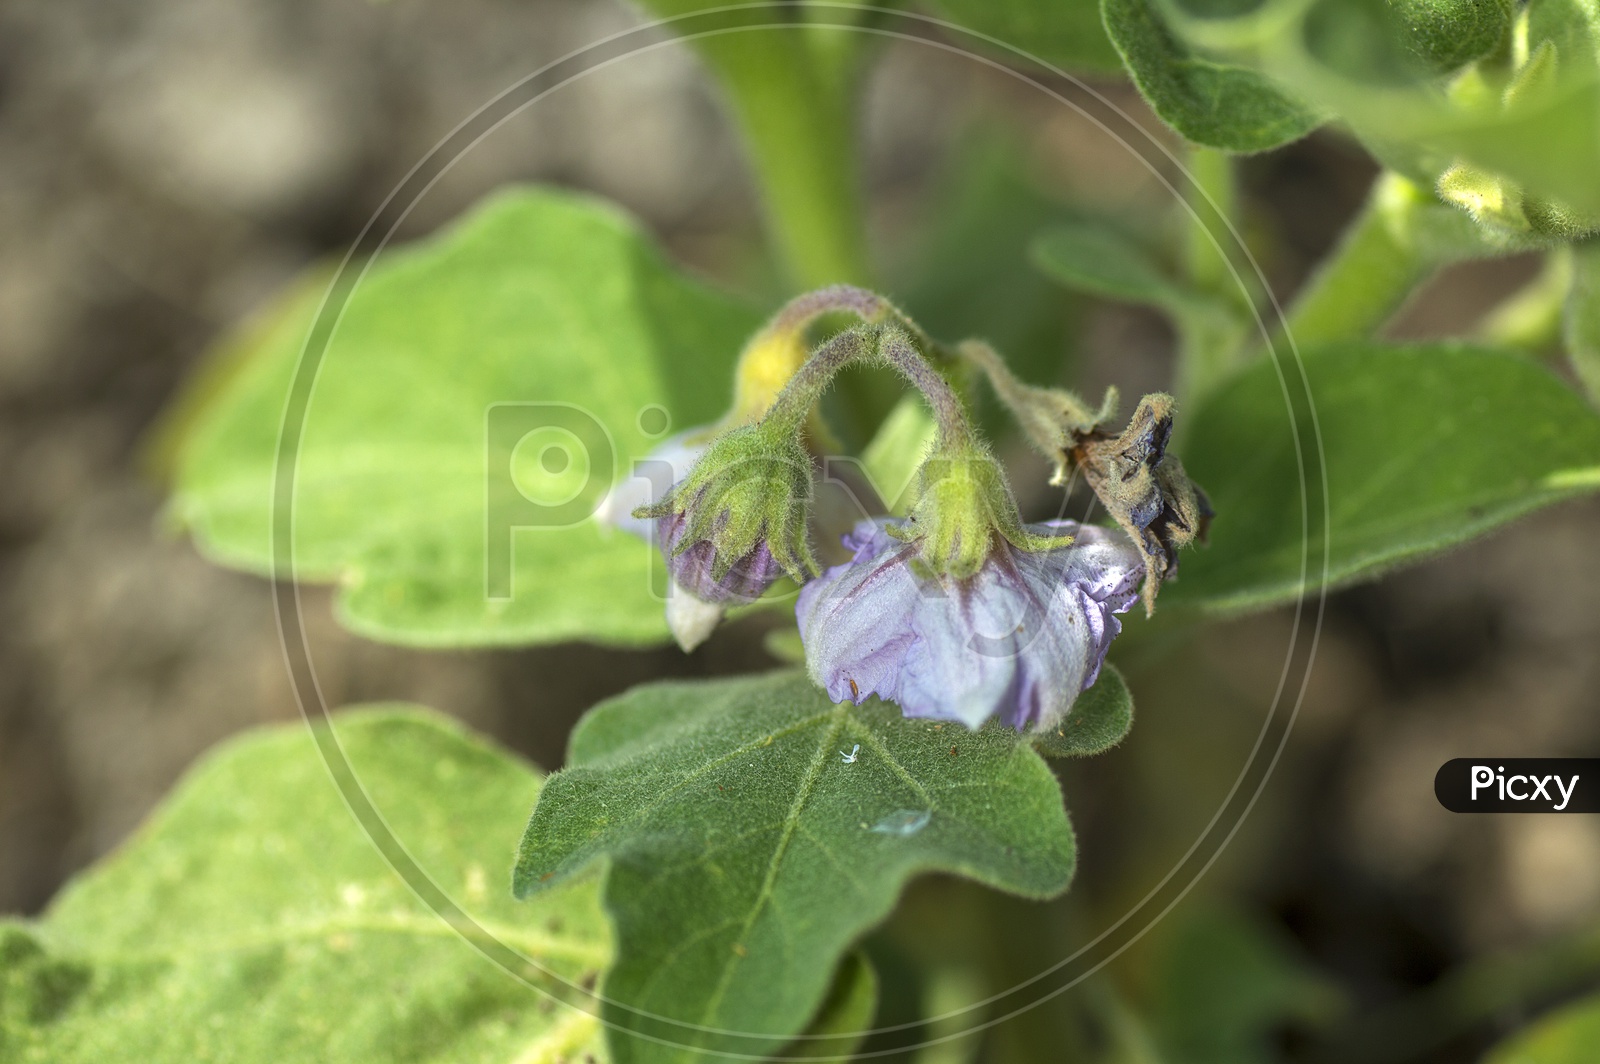 Egg Plant Or Brinjal Or Baigan Plants In an Agricultural Field or Farm